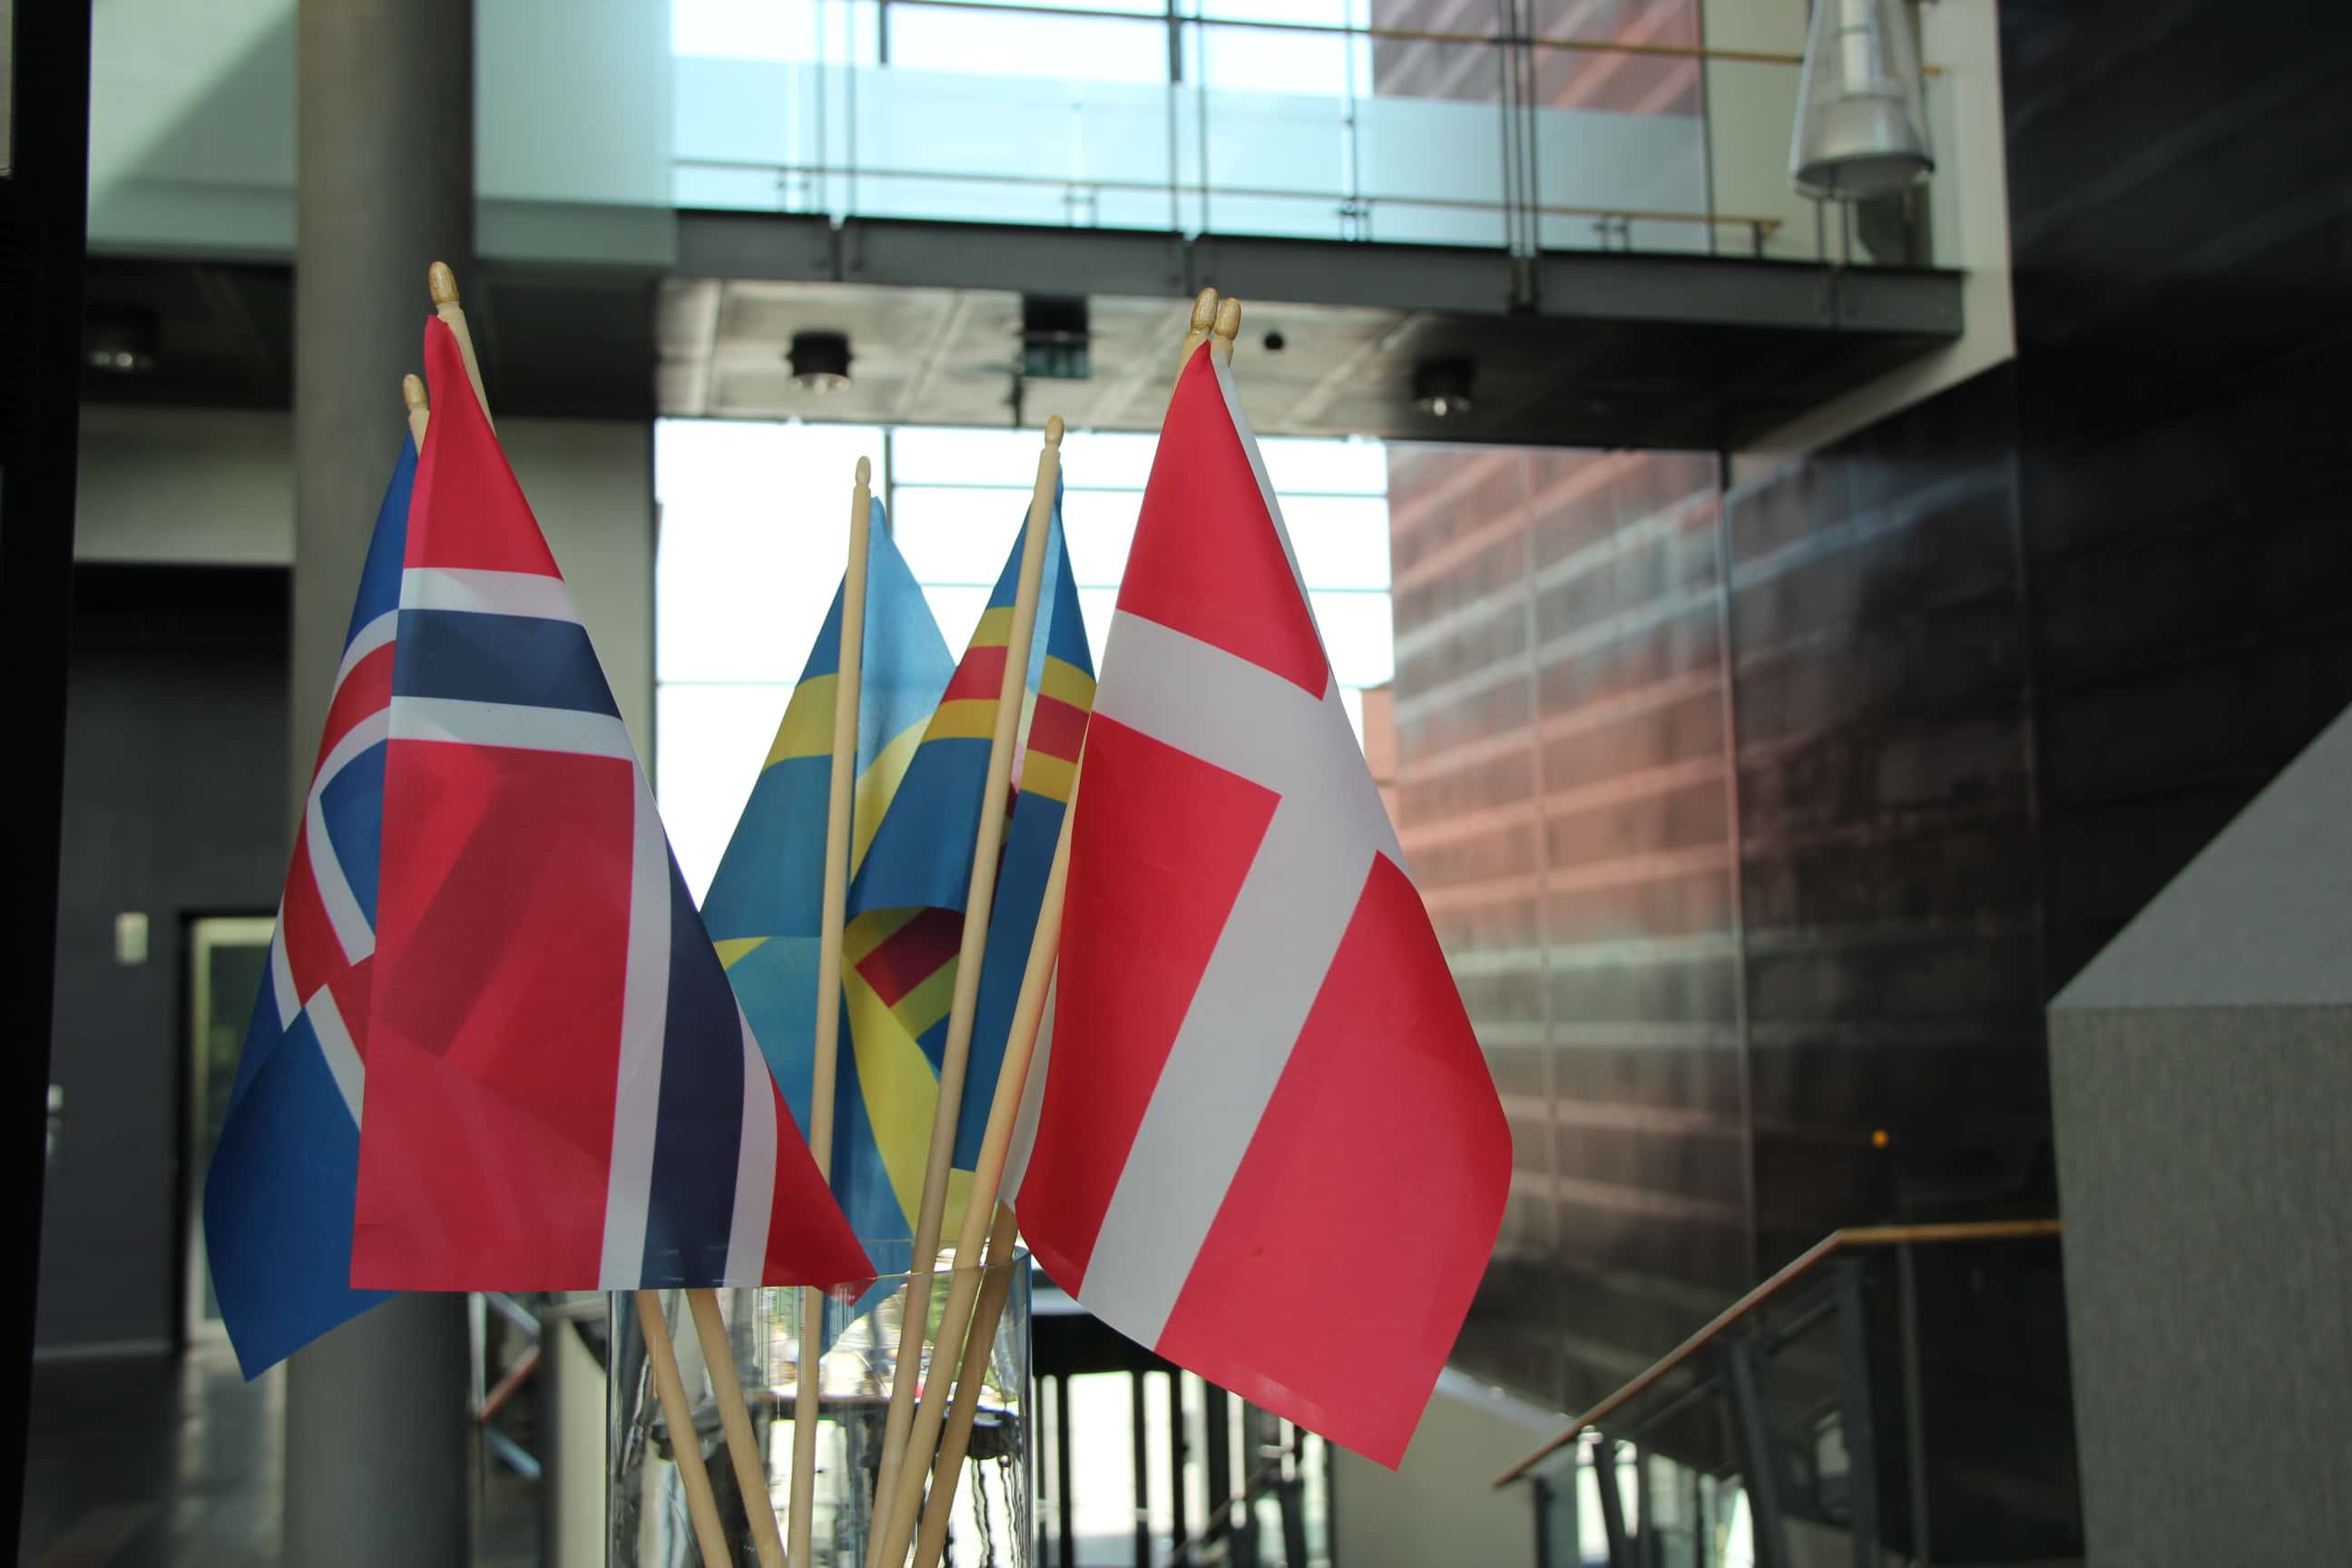 Flags of Nordic countries.